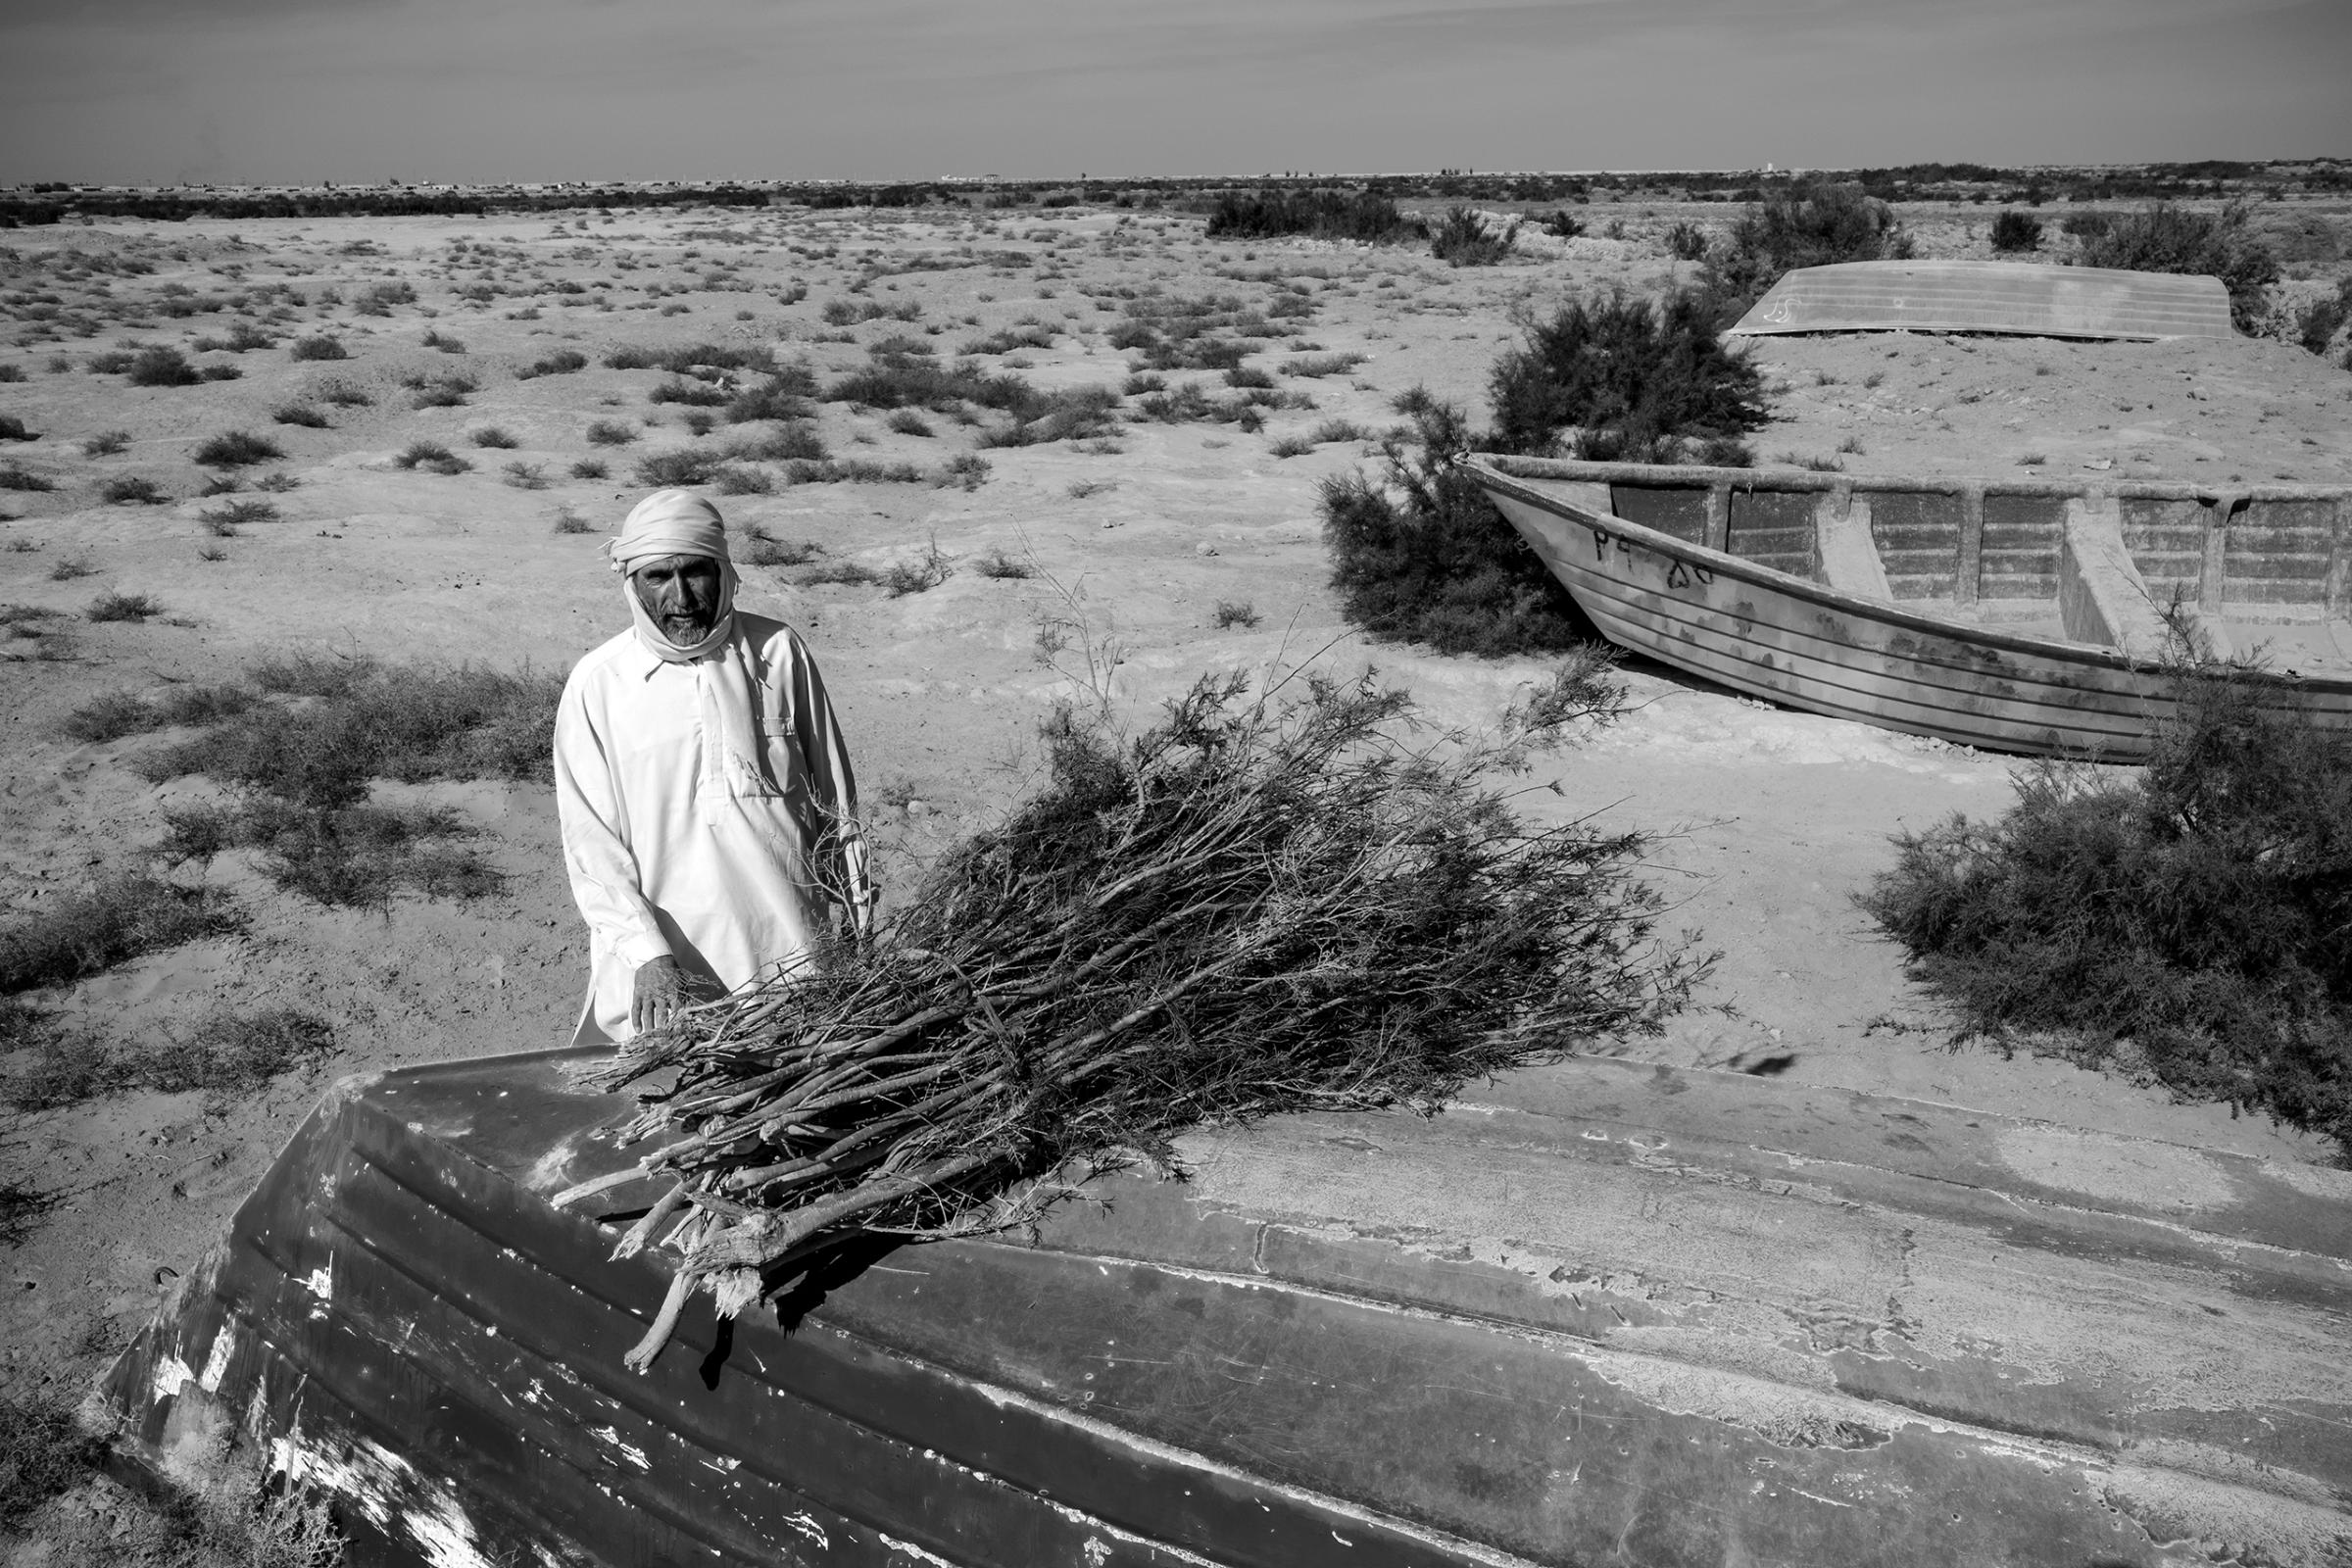 A fisherman sells tamarisk reeds in the dried-out seabed of Lake Hamoon.  At the border between Iran and Afghanistan, the Sistan Basin is one of the most arid places in the world. Drought and mismanagement of irrigation contributed to drying out the lake, thereby impacting wildlife and the livelihood of the local population, December 2016.